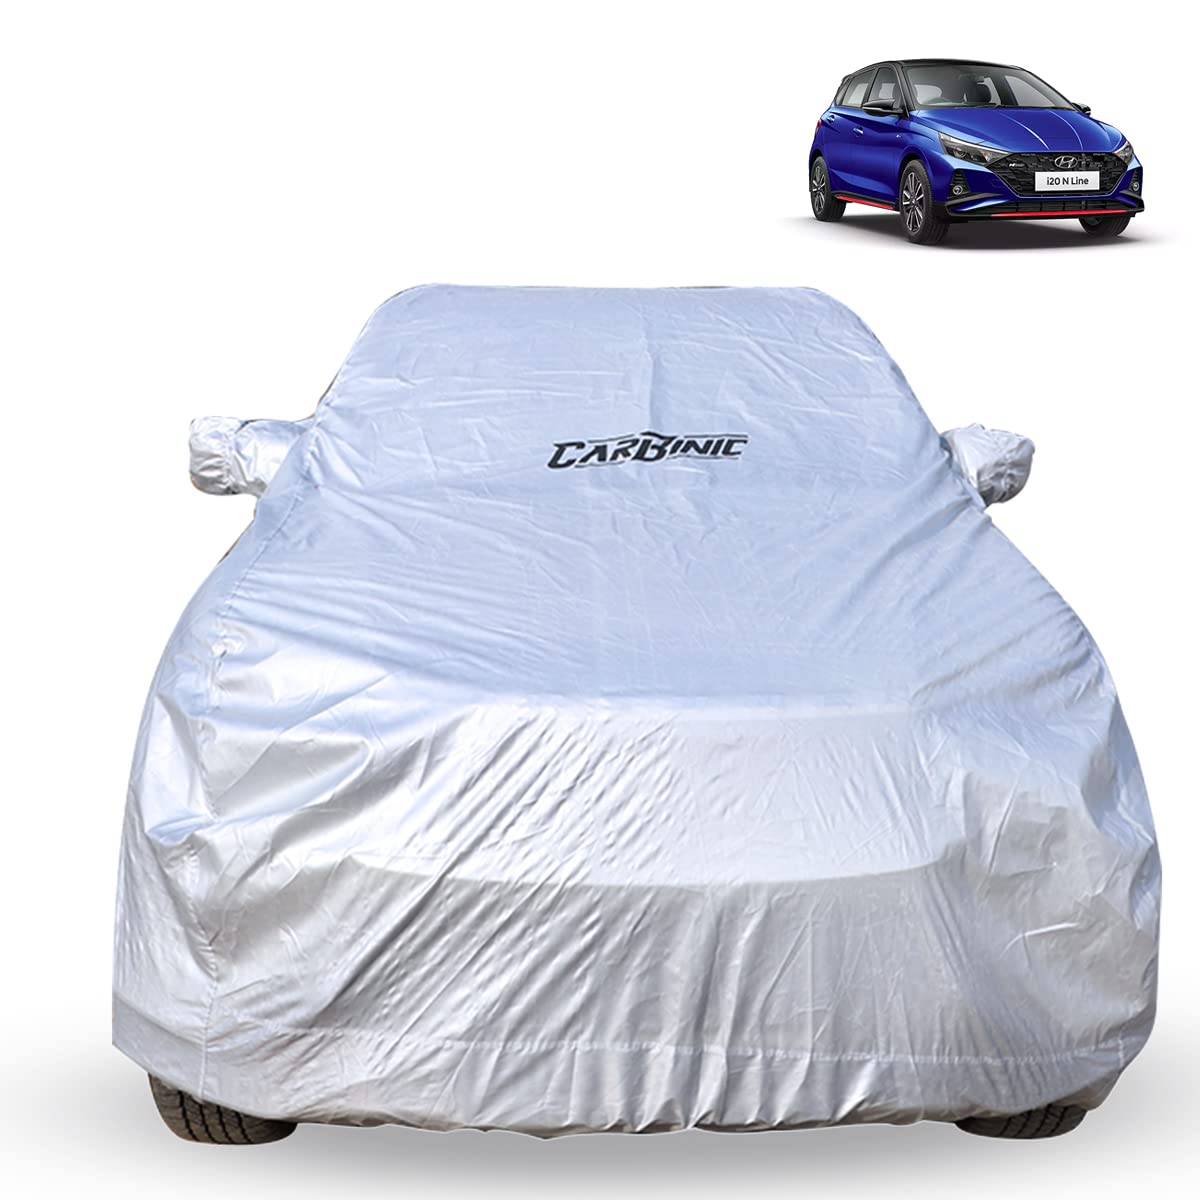 CARBINIC Car Body Cover for Hyundai Elite i20 | Water Resistant, UV Protection Car Cover | Scratchproof Body Shield | Dustproof All-Weather Cover | Mirror Pocket & Antenna | Car Accessories, Silver